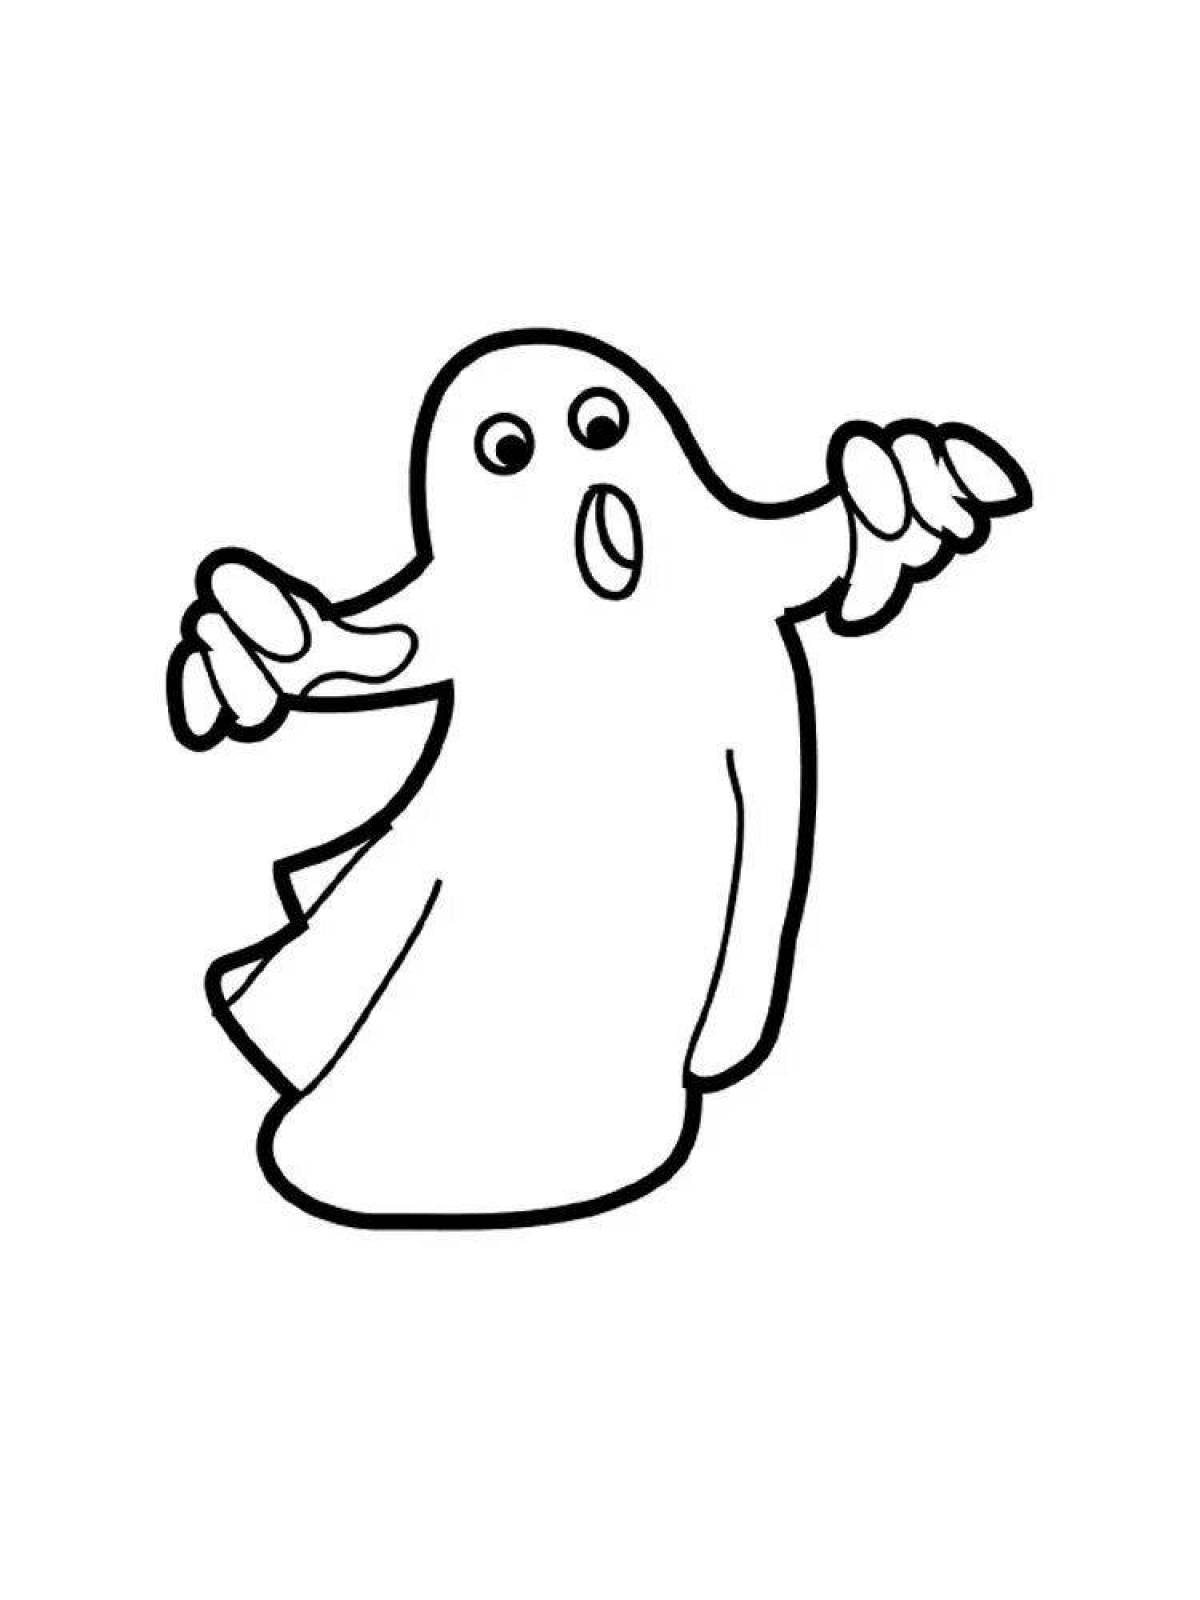 Gloomy ghost coloring page